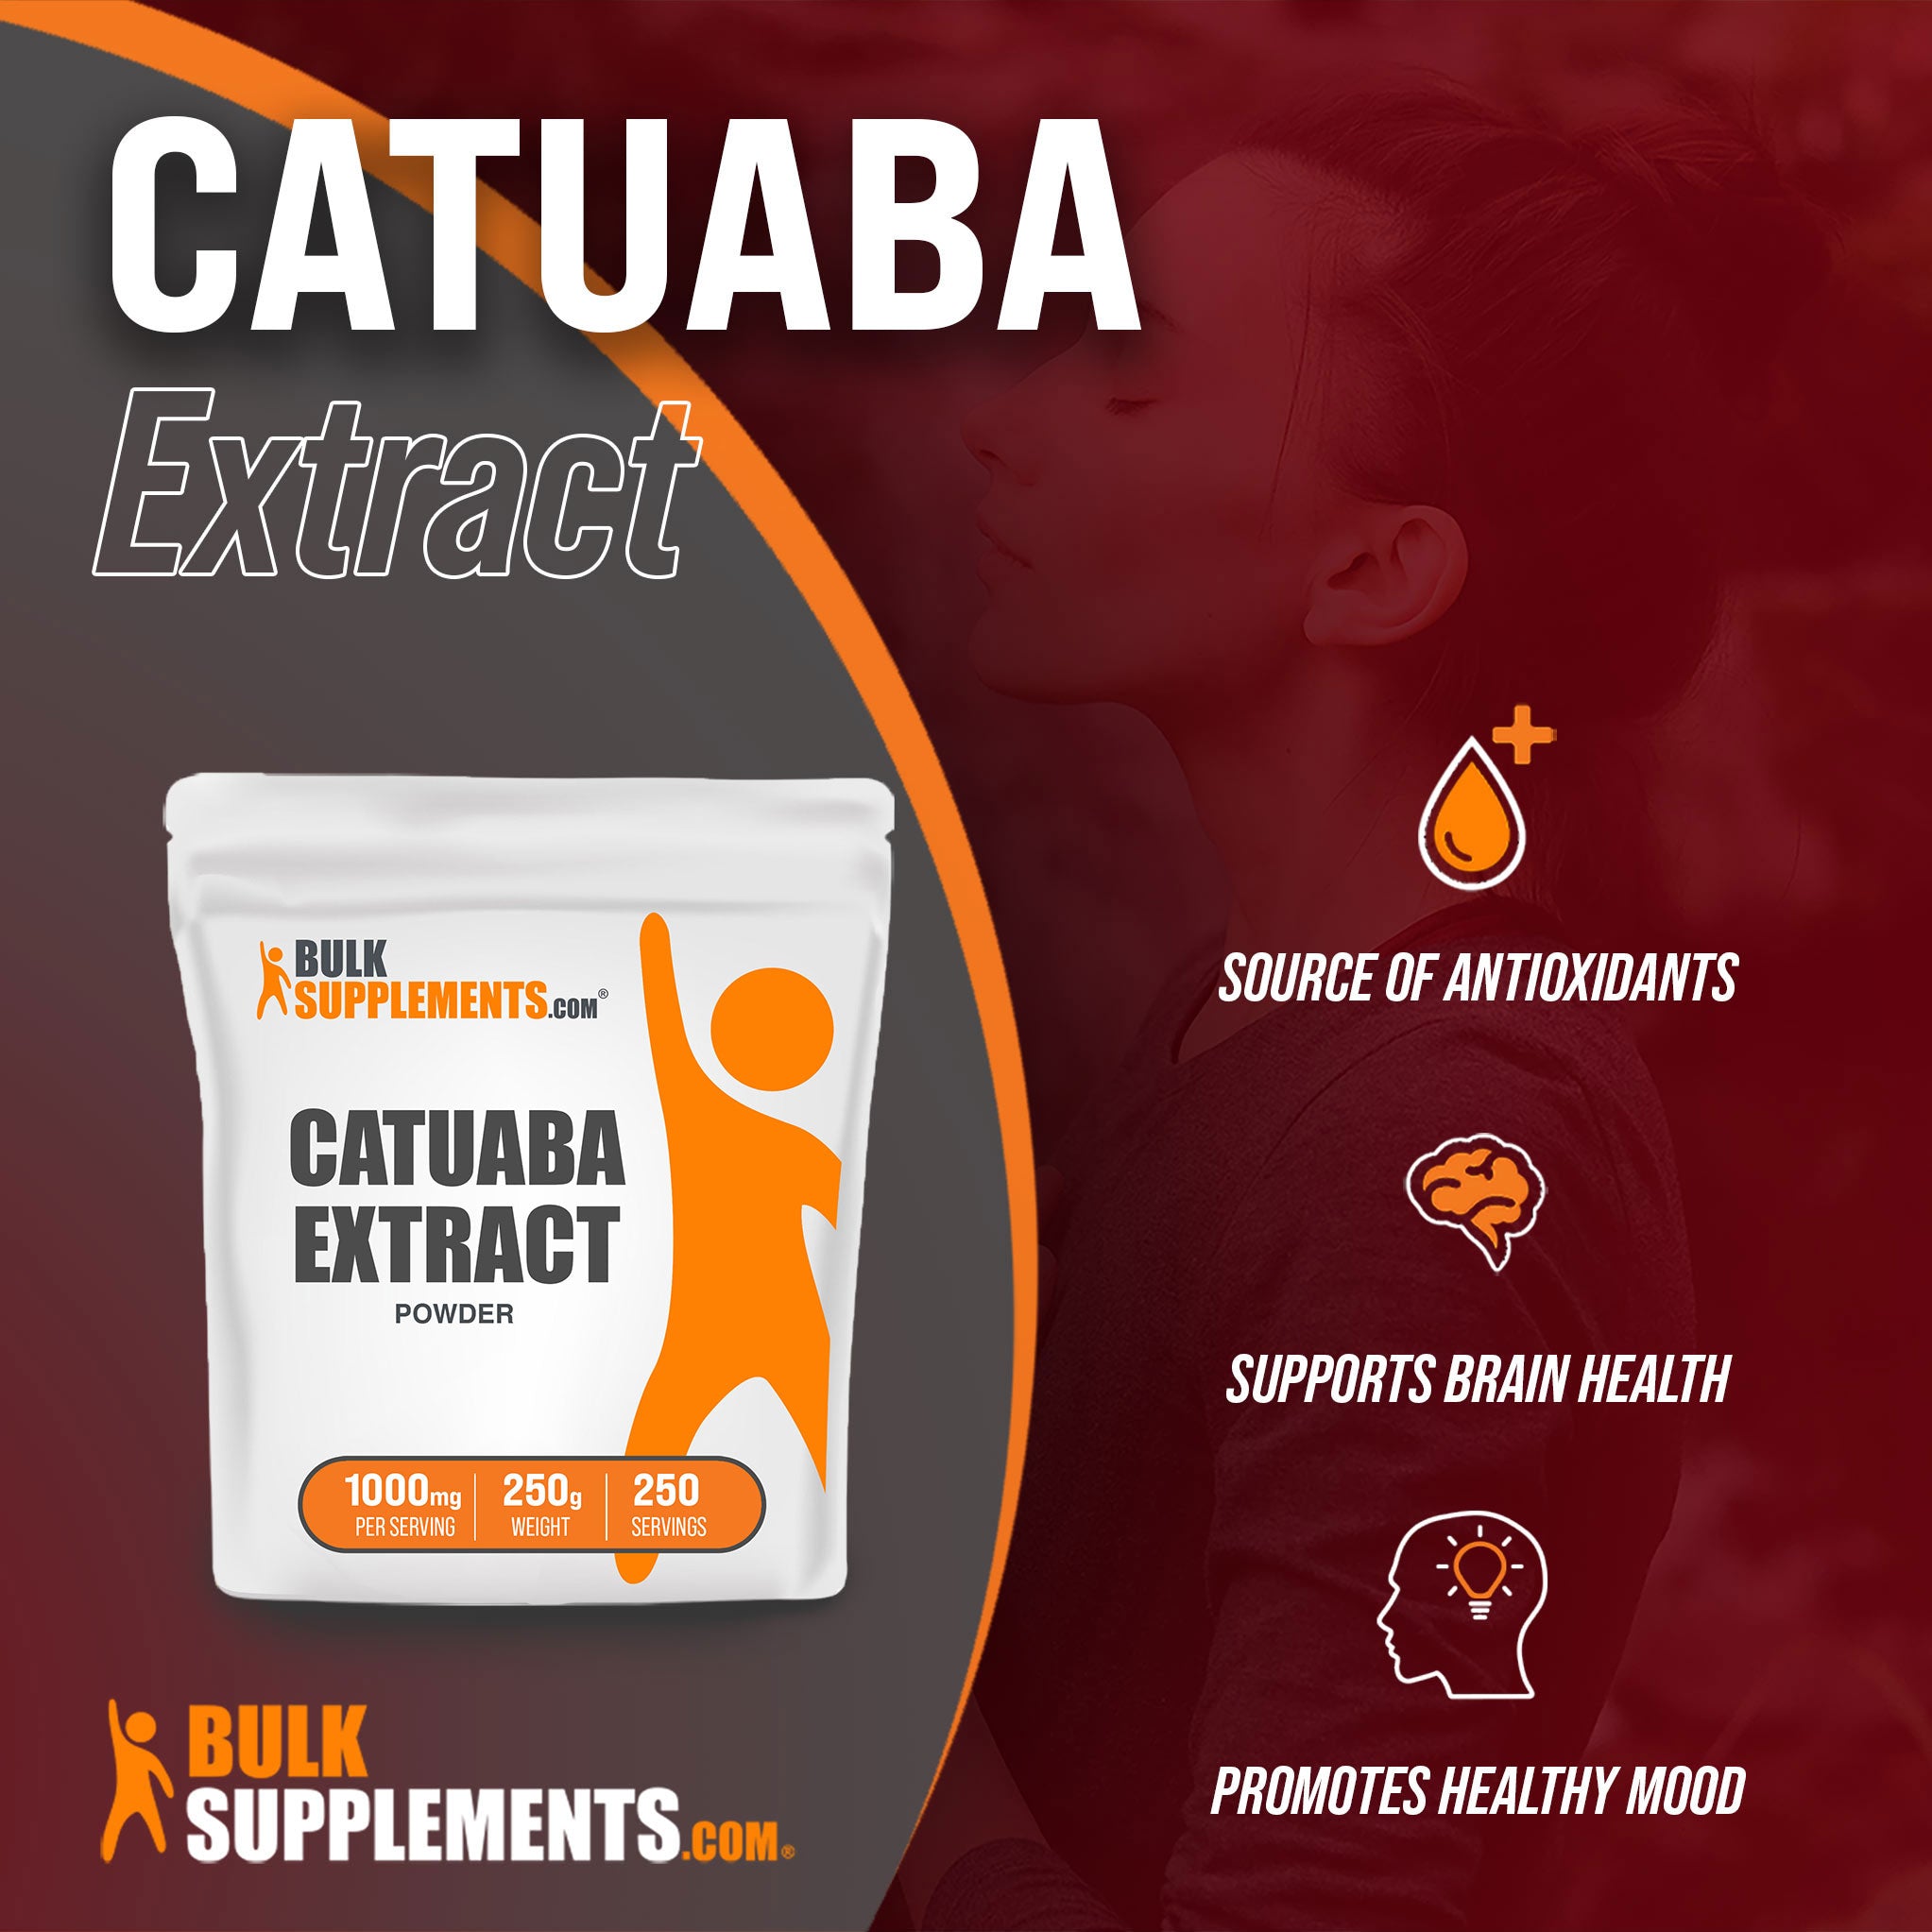 Benefits of Catuaba Extract; source of antioxidants, supports brain health, promotes healthy mood